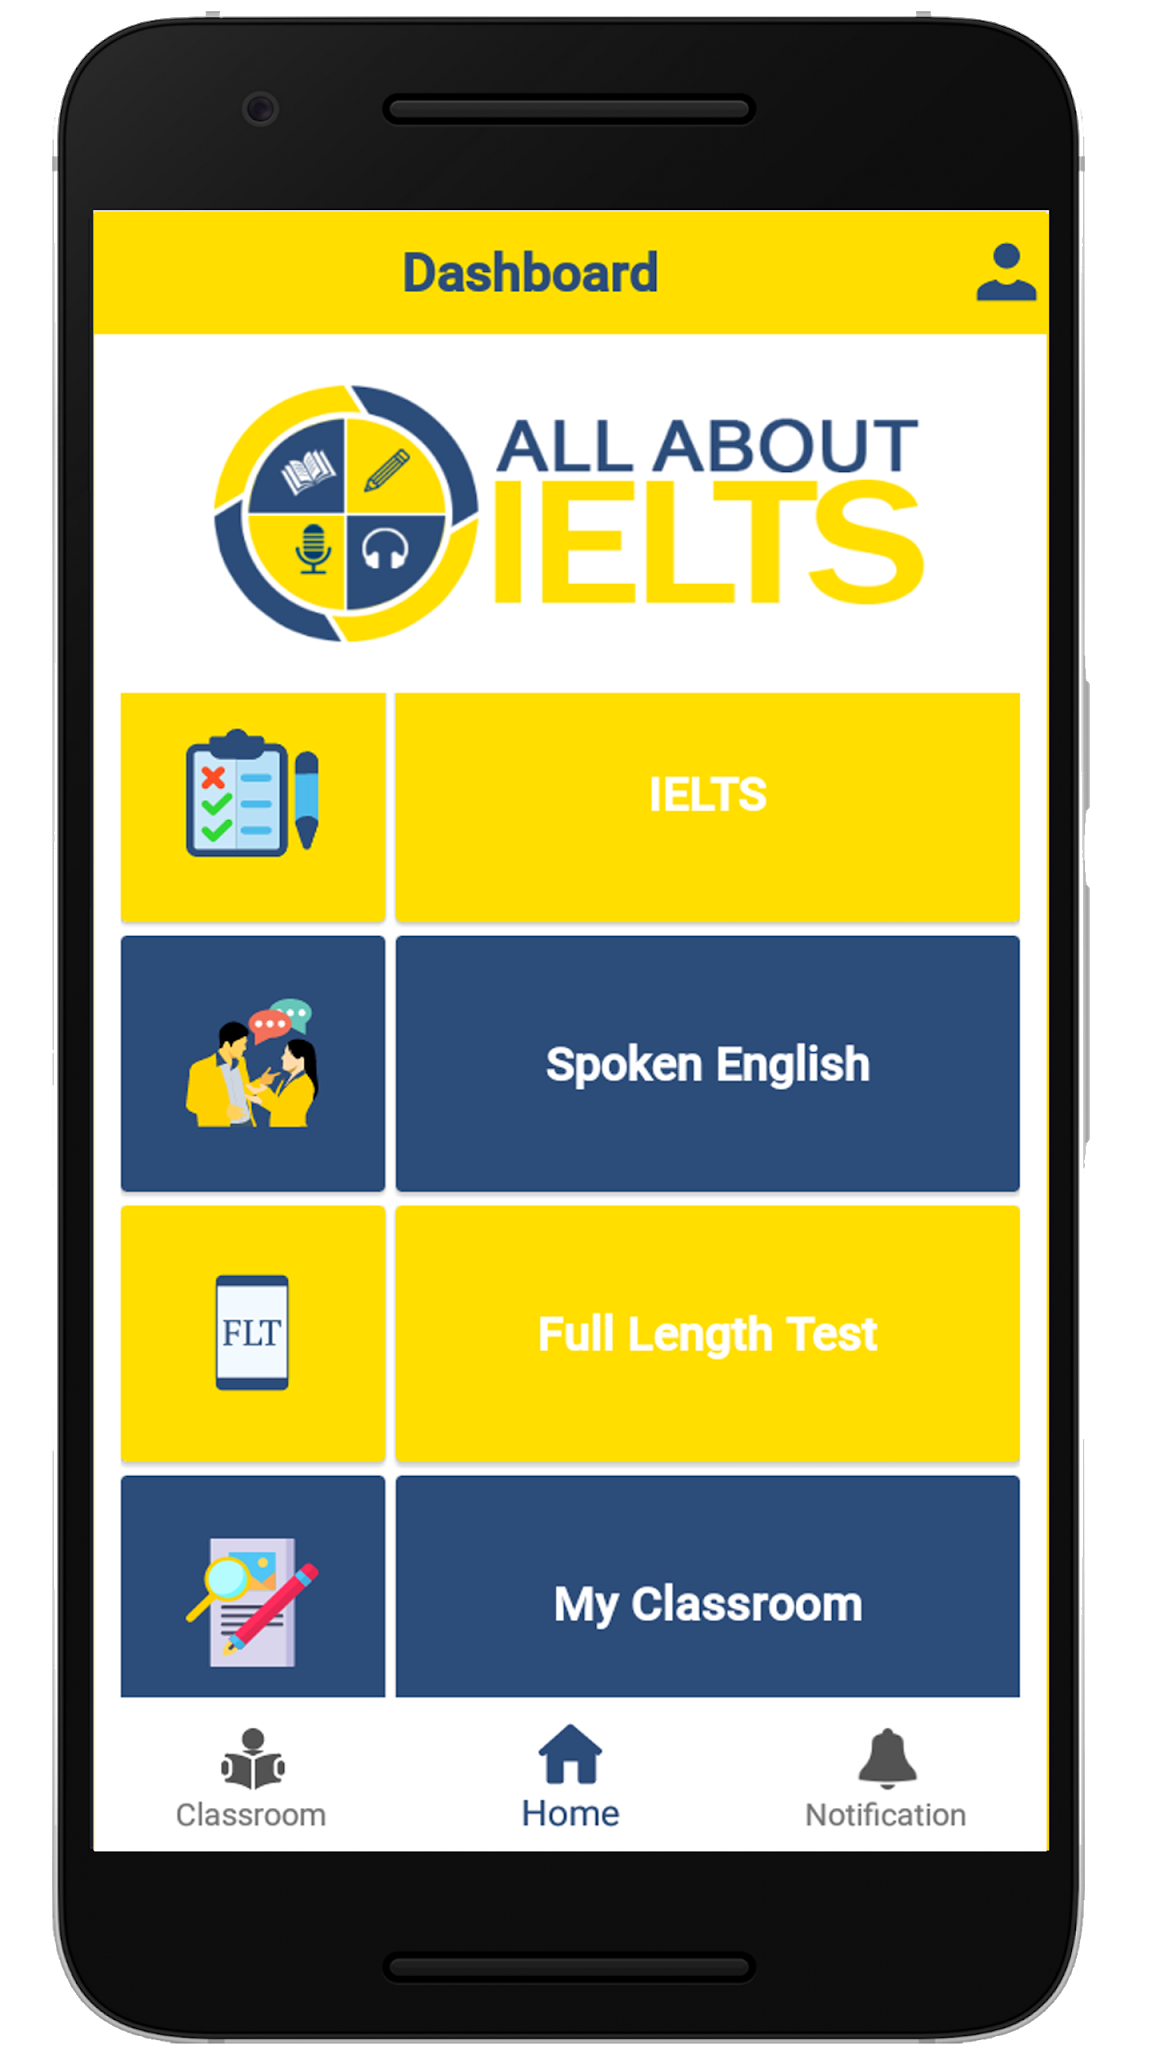 All About IELTS: Training & Exam Preparation